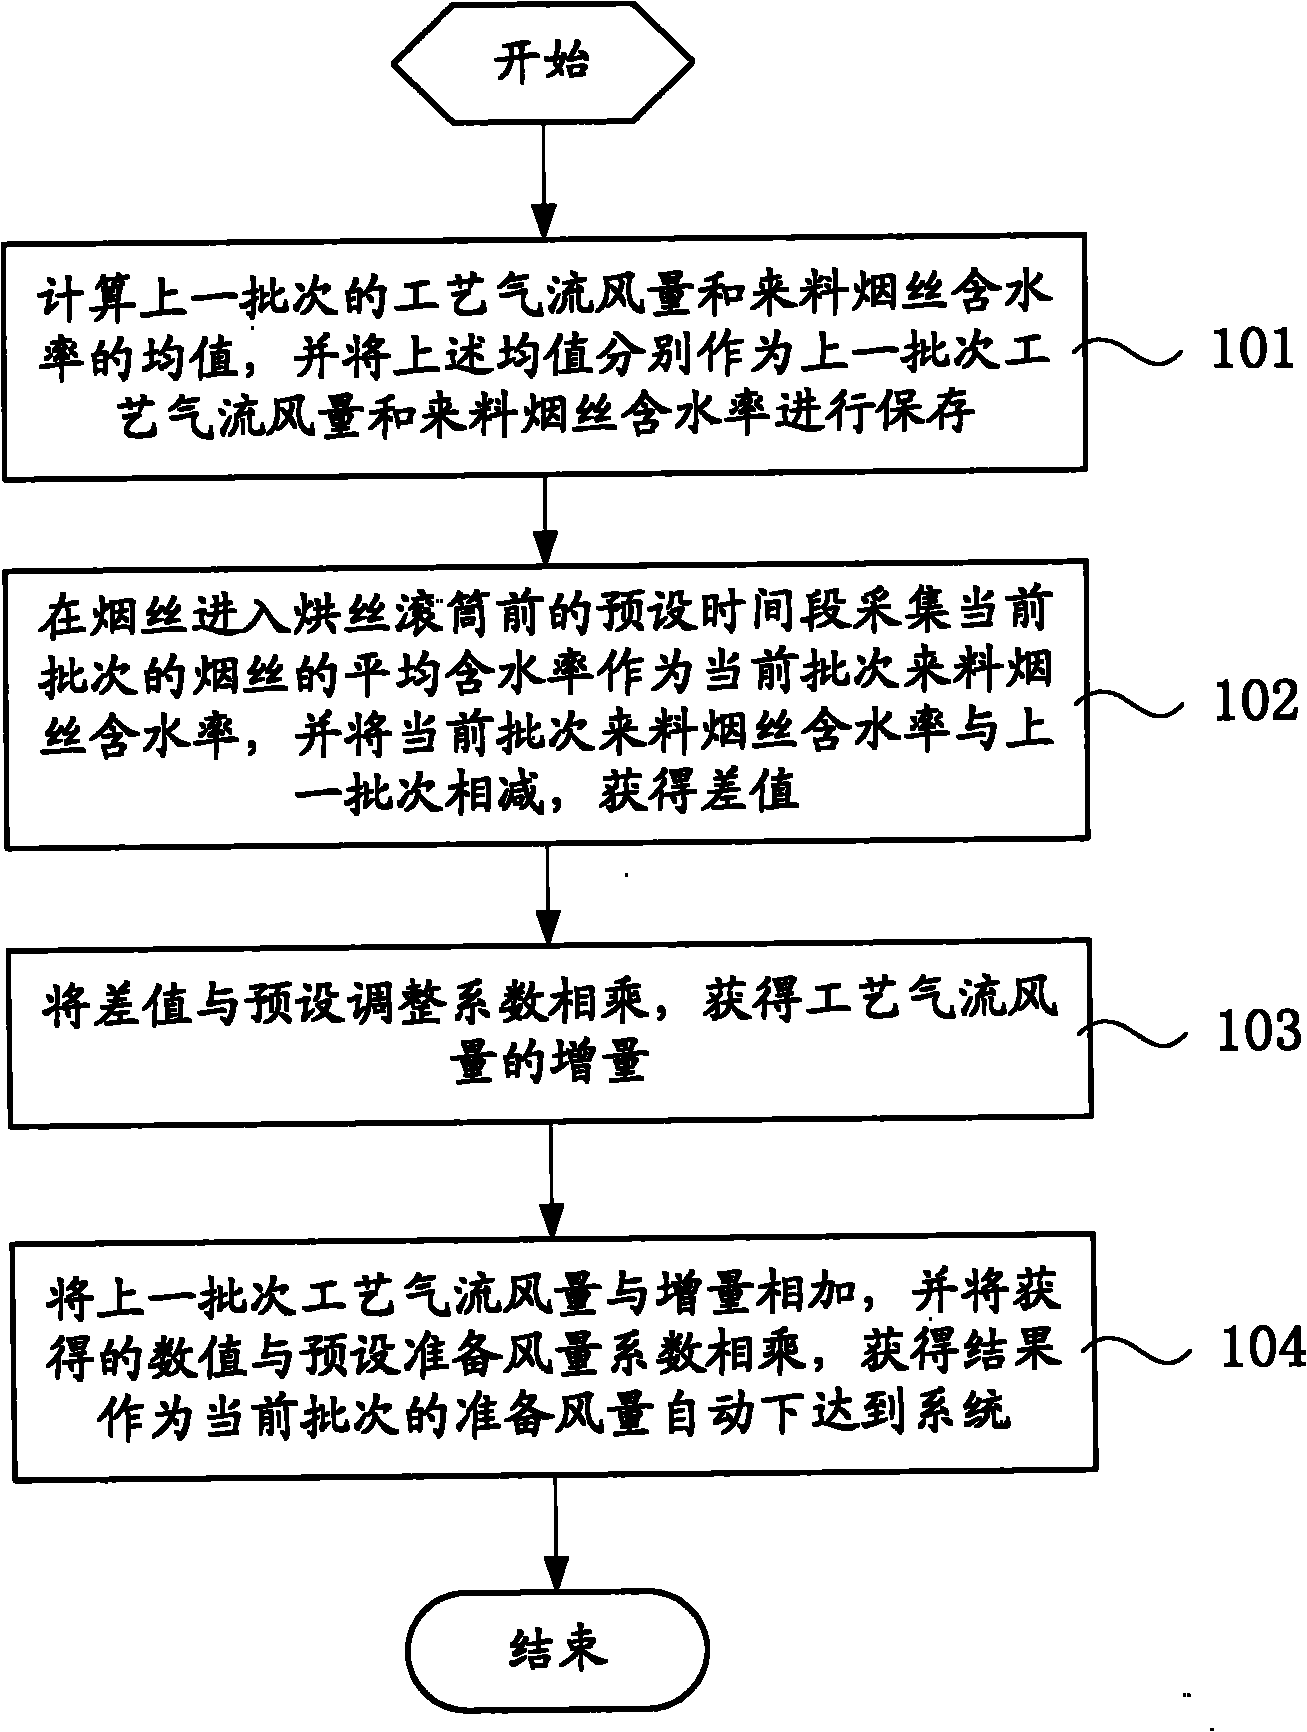 Control method for improving stability of moisture content of cut tobaccos